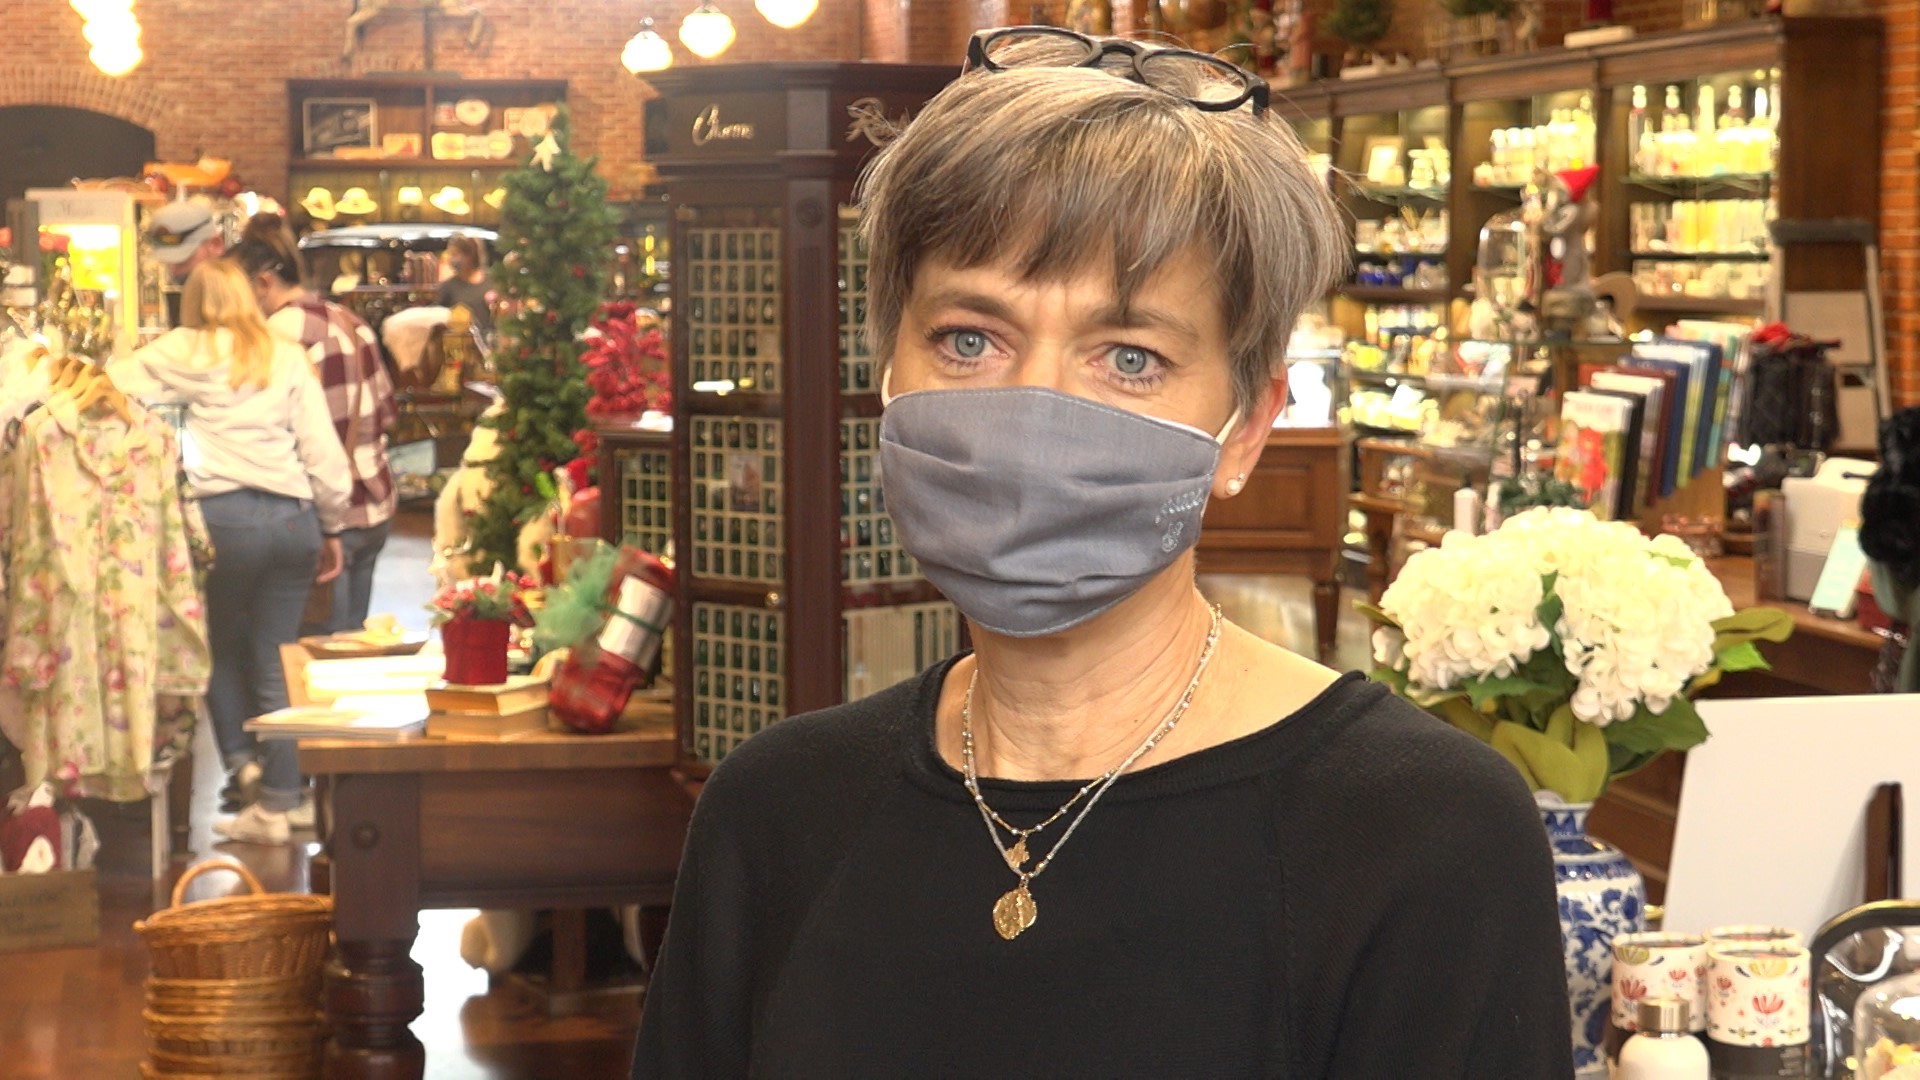 Many locally-owned businesses experienced huge losses from the pandemic and are hoping holiday shopping will give them the boost they need.